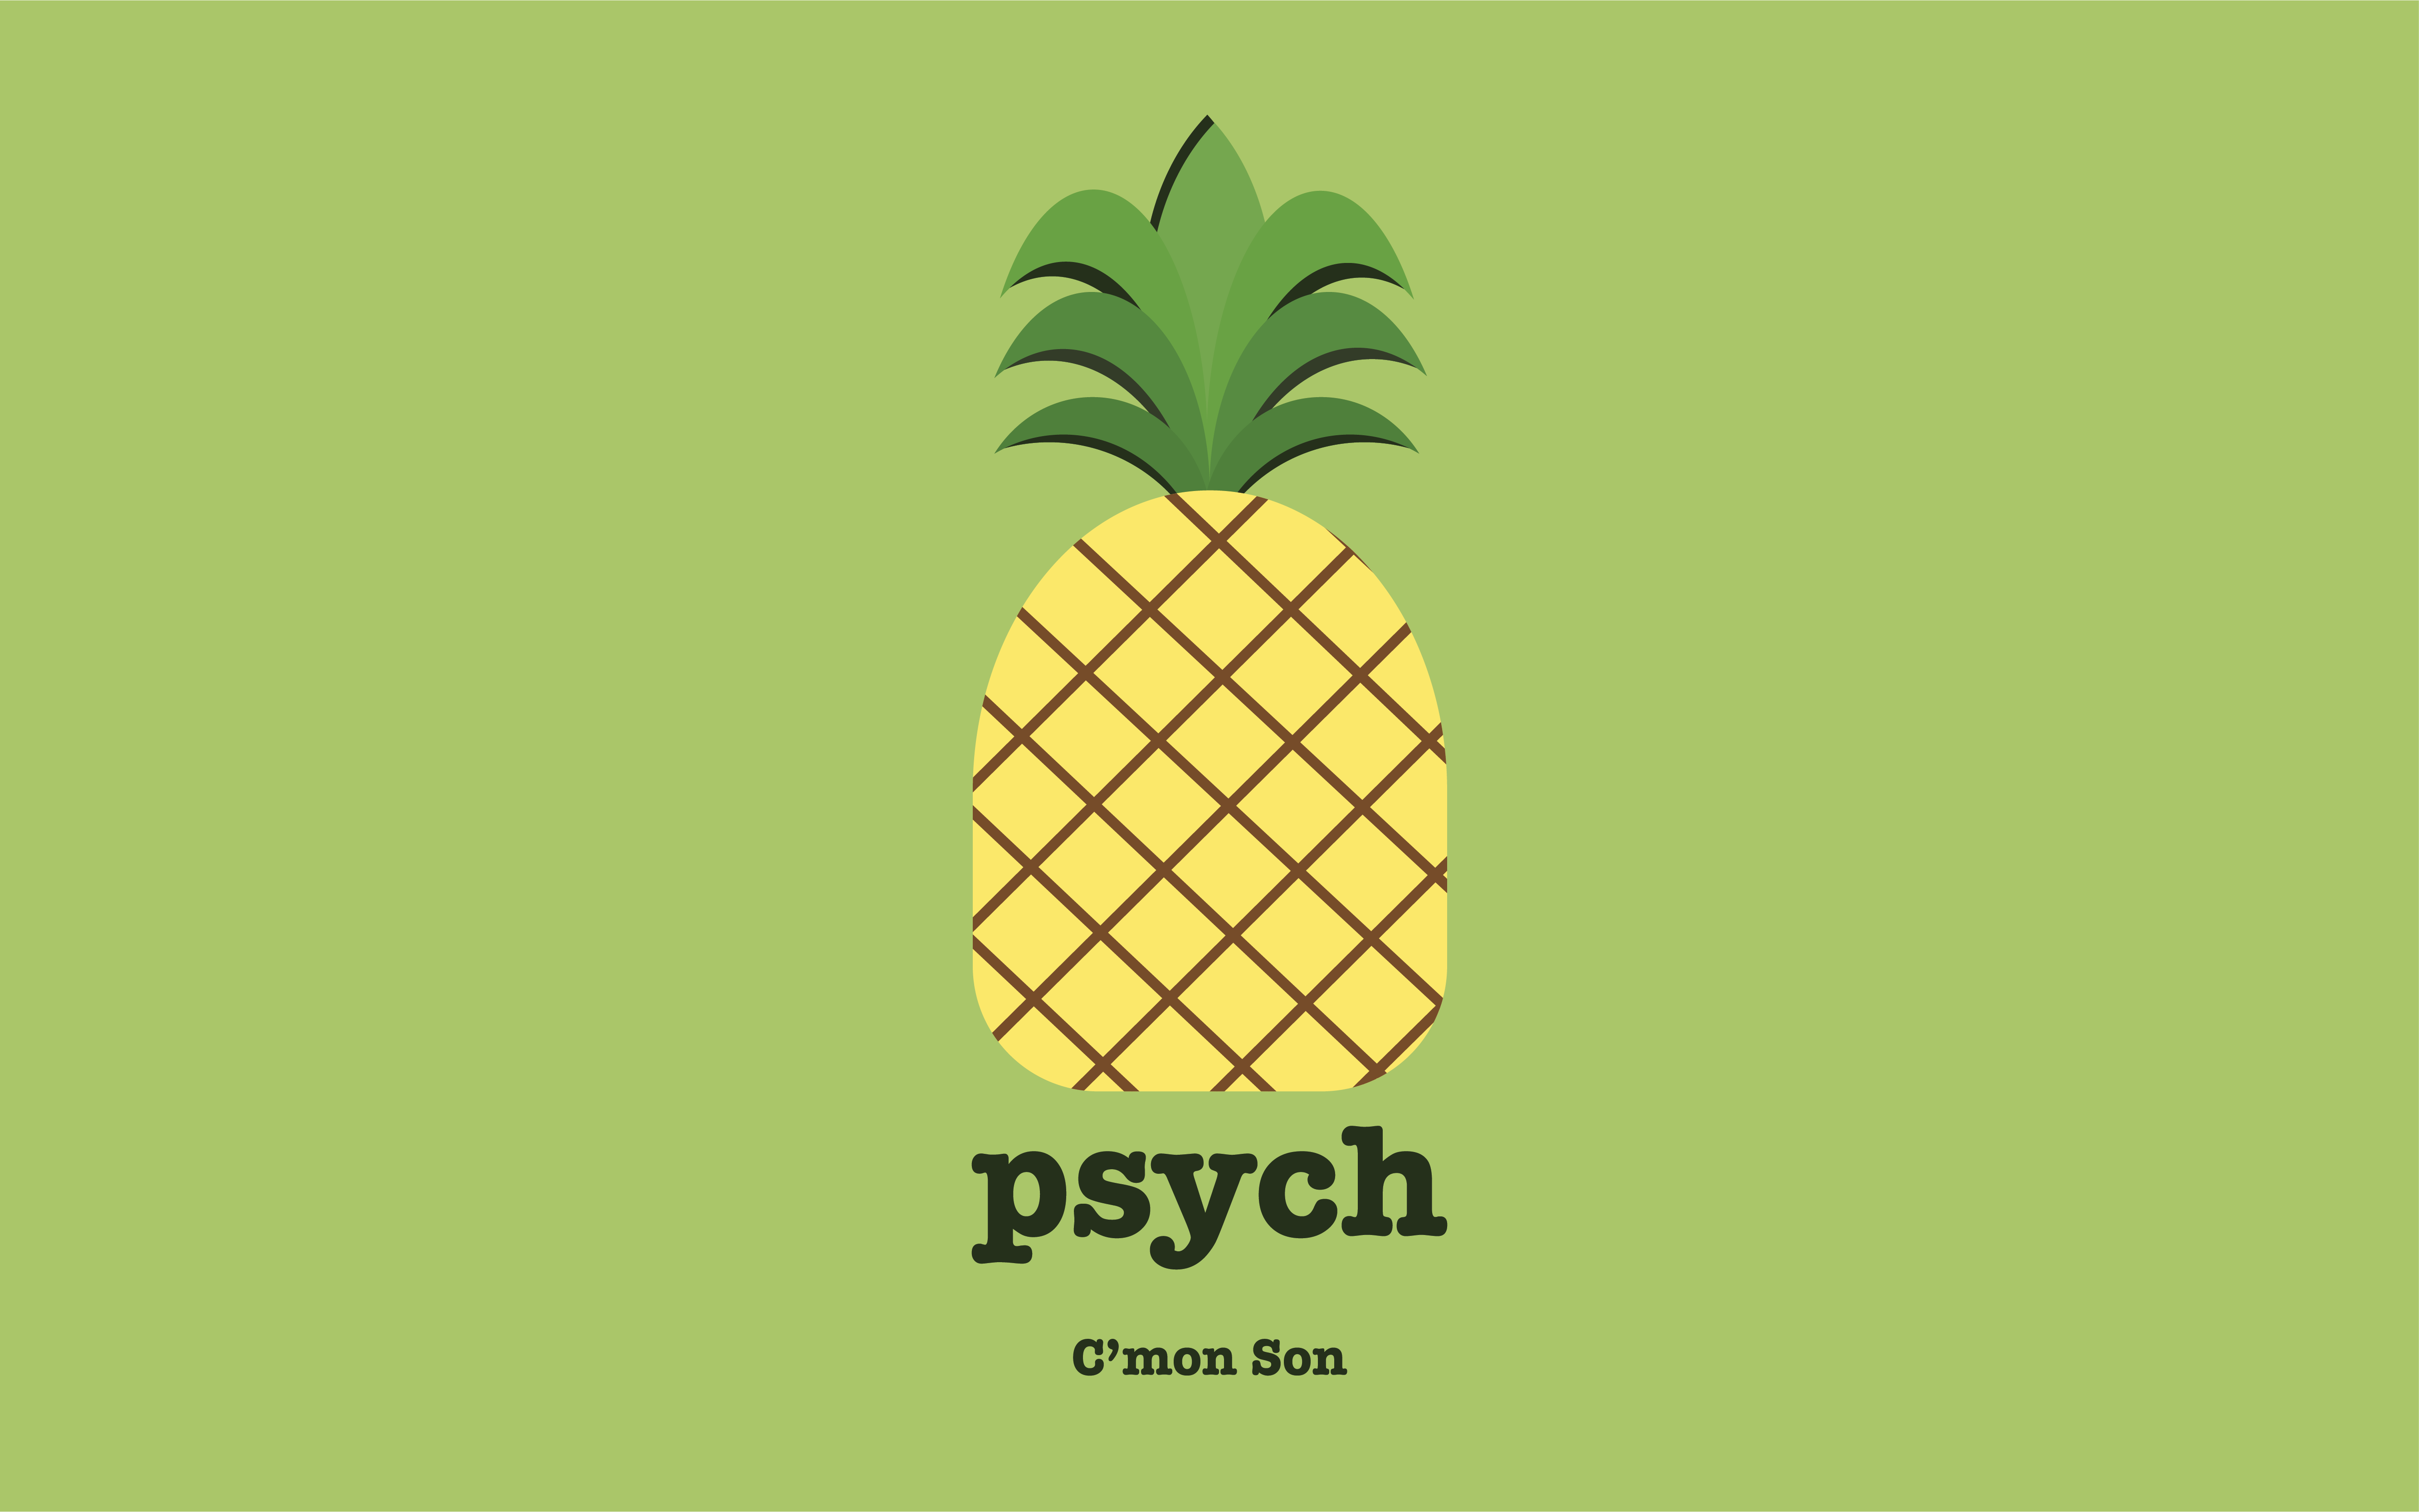 Psych Wallpaper Free Psych Background